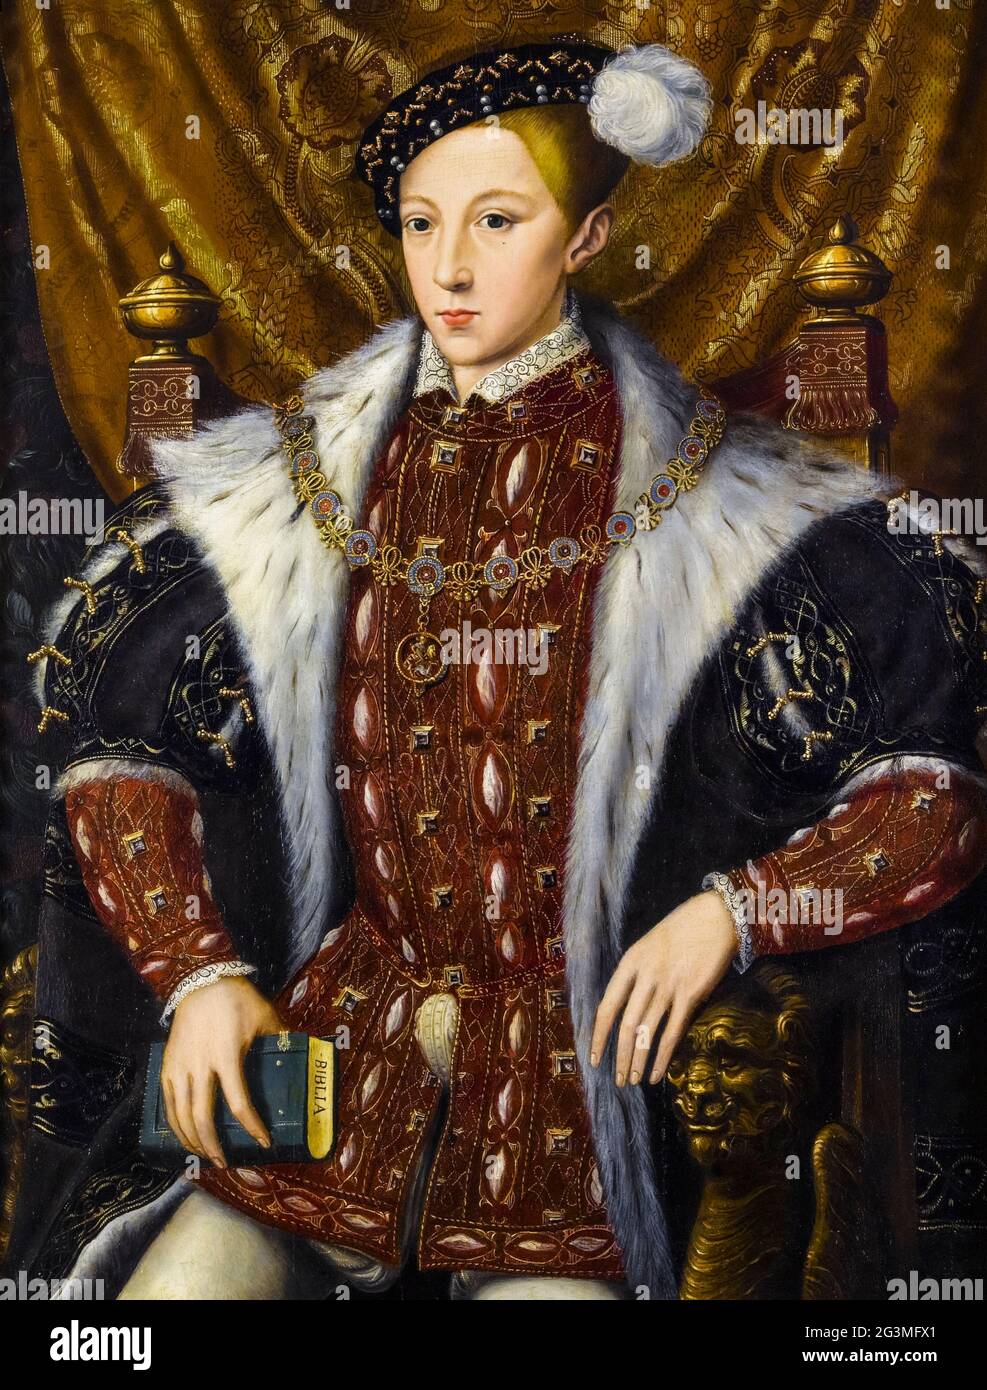 Edward VI (1537-1553) King of England and Ireland (1547-1553), portrait painting by the circle of William Scrots, circa 1550 Stock Photo